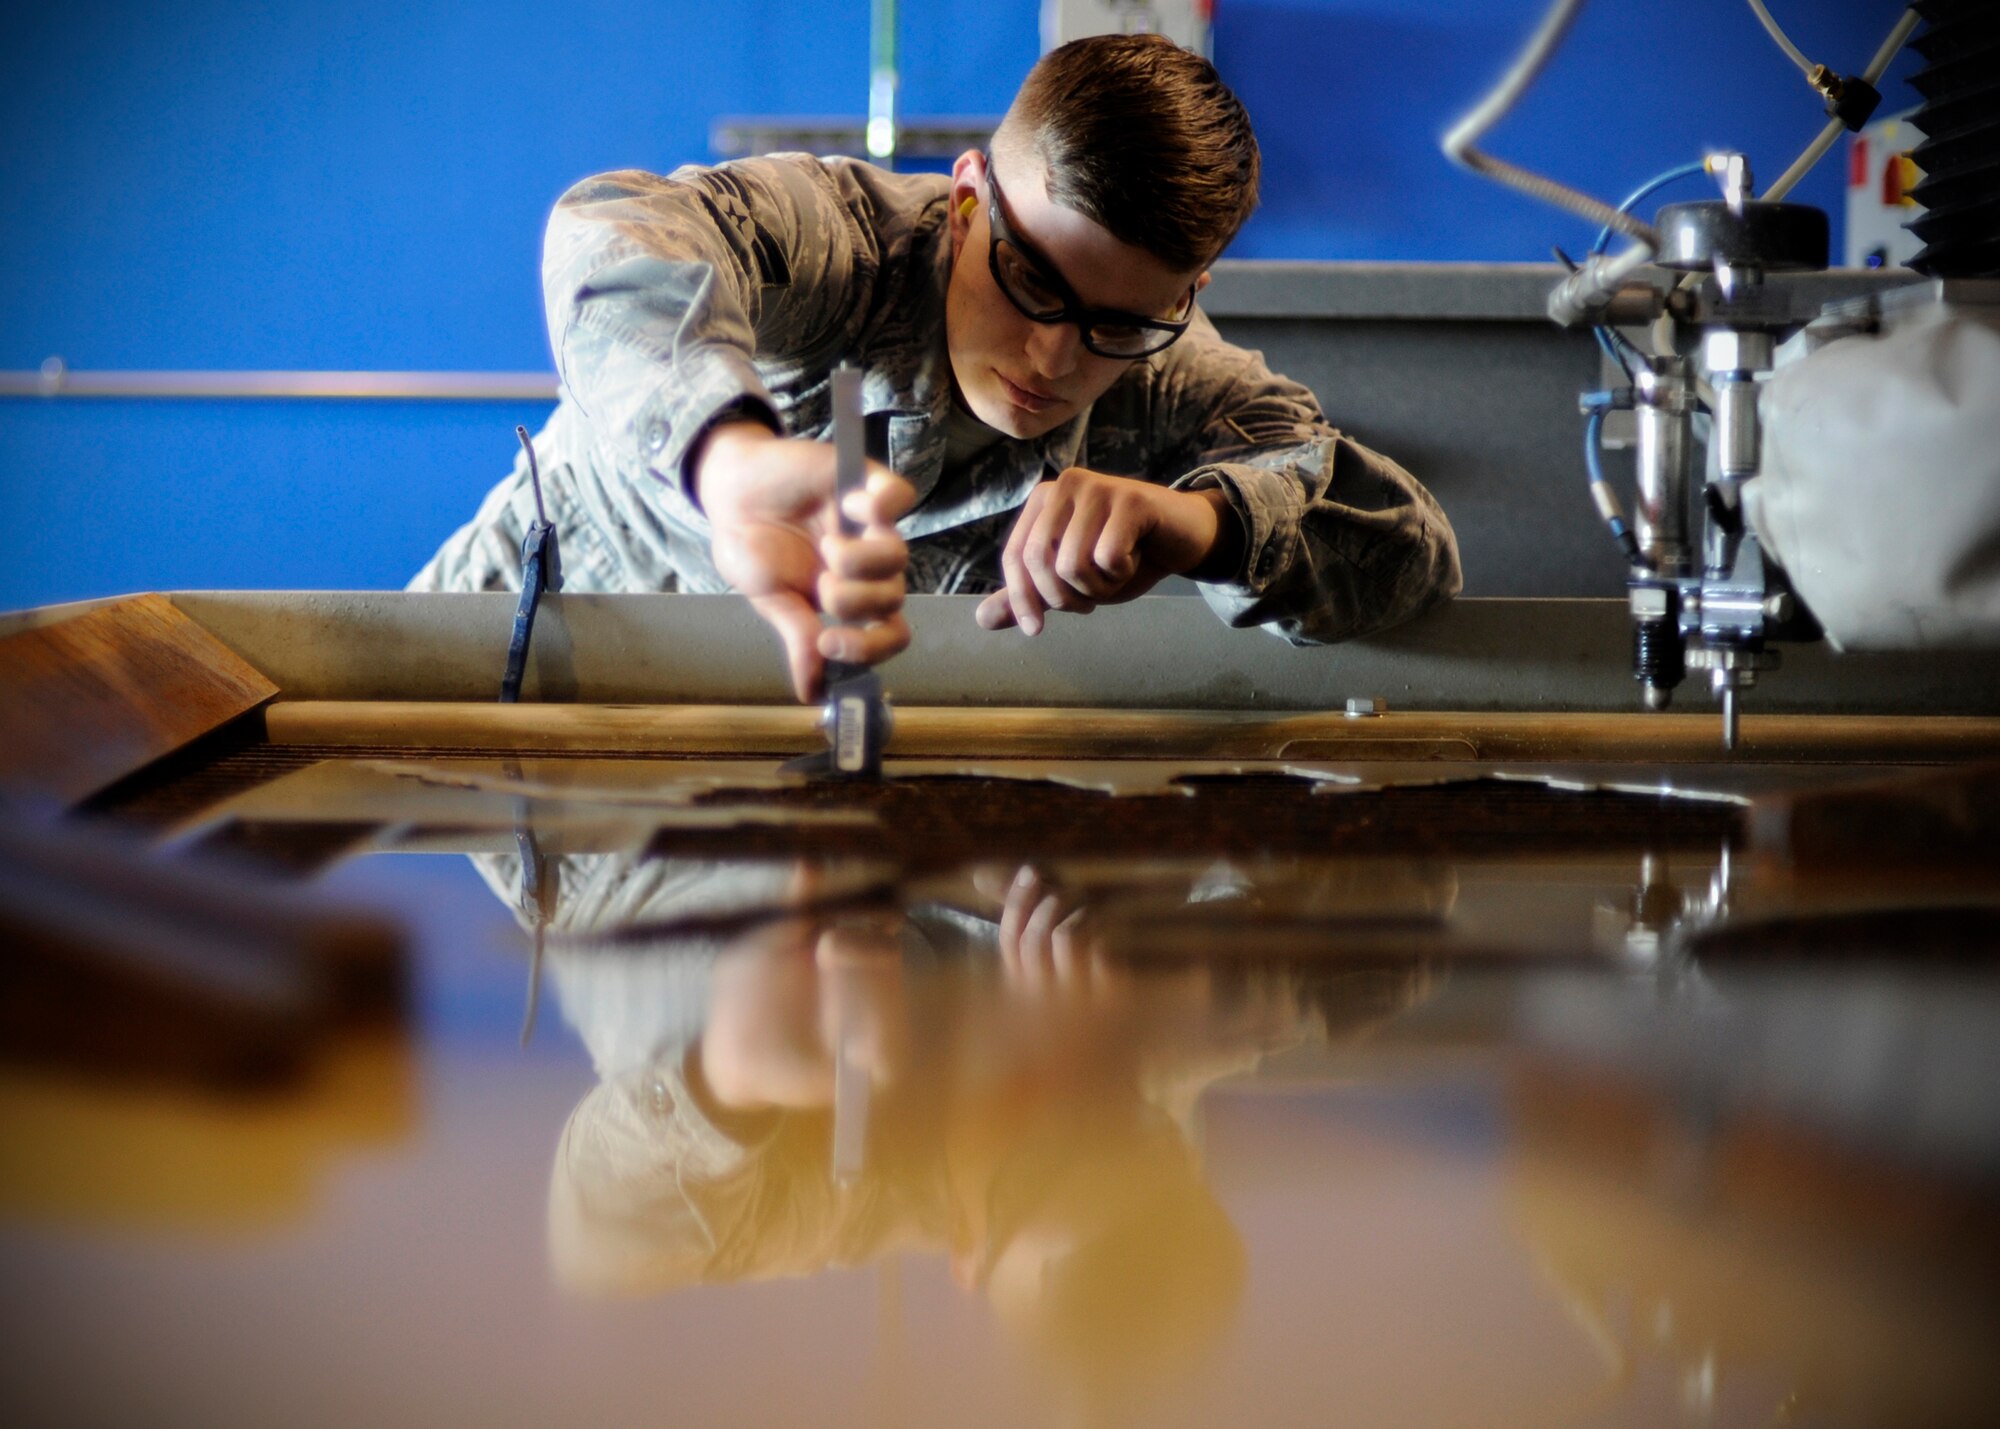 U.S. Air Force Senior Airman Robert Mason, 354th Maintenance Squadron metals technology journeyman, uses a caliper to measure aluminum while fabricating a part for an F-16 Fighting Falcon at Eielson Air Force Base, Alaska, July 22, 2013. Commonly, a part for an aircraft can’t be purchased or is just cheaper to produce. Metals tech Airmen can fabricate almost any part or tool from raw material. (U.S. Air Force Senior Airman Shawn Nickel/Released)